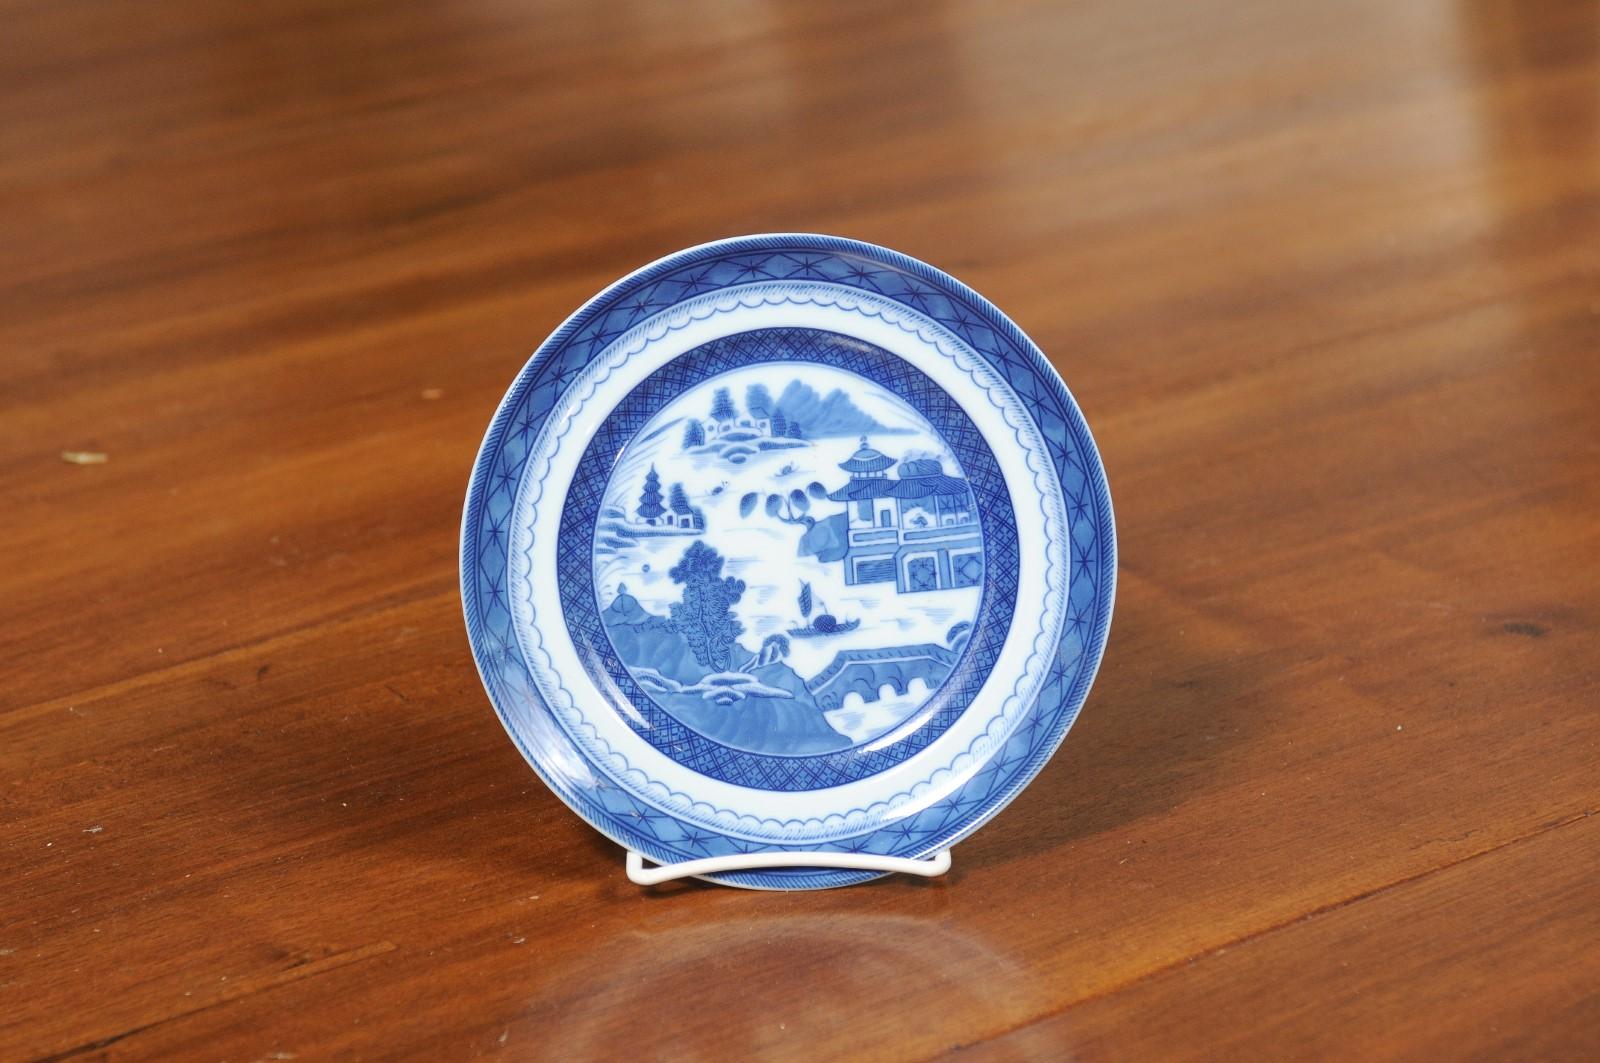 A Mottahedeh Blue Canton blue and white porcelain salad plate from the 20th century with pagoda and geometric accents. Created in Portugal by Mottahedeh under license of the Historic Charleston Foundation to reproduce the design of the original